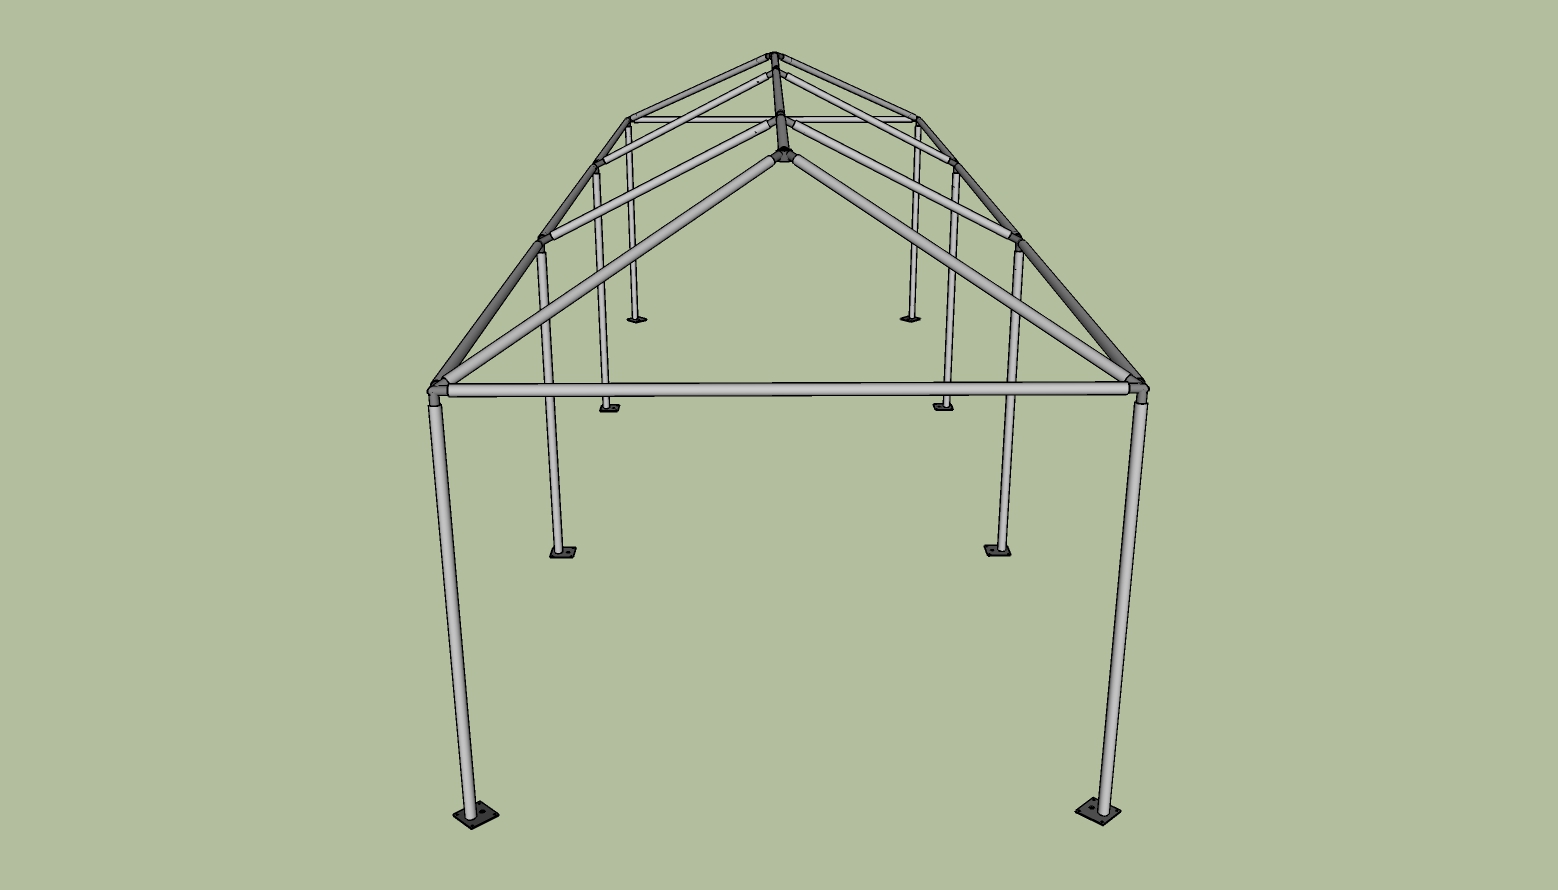 10x30 frame tent side view